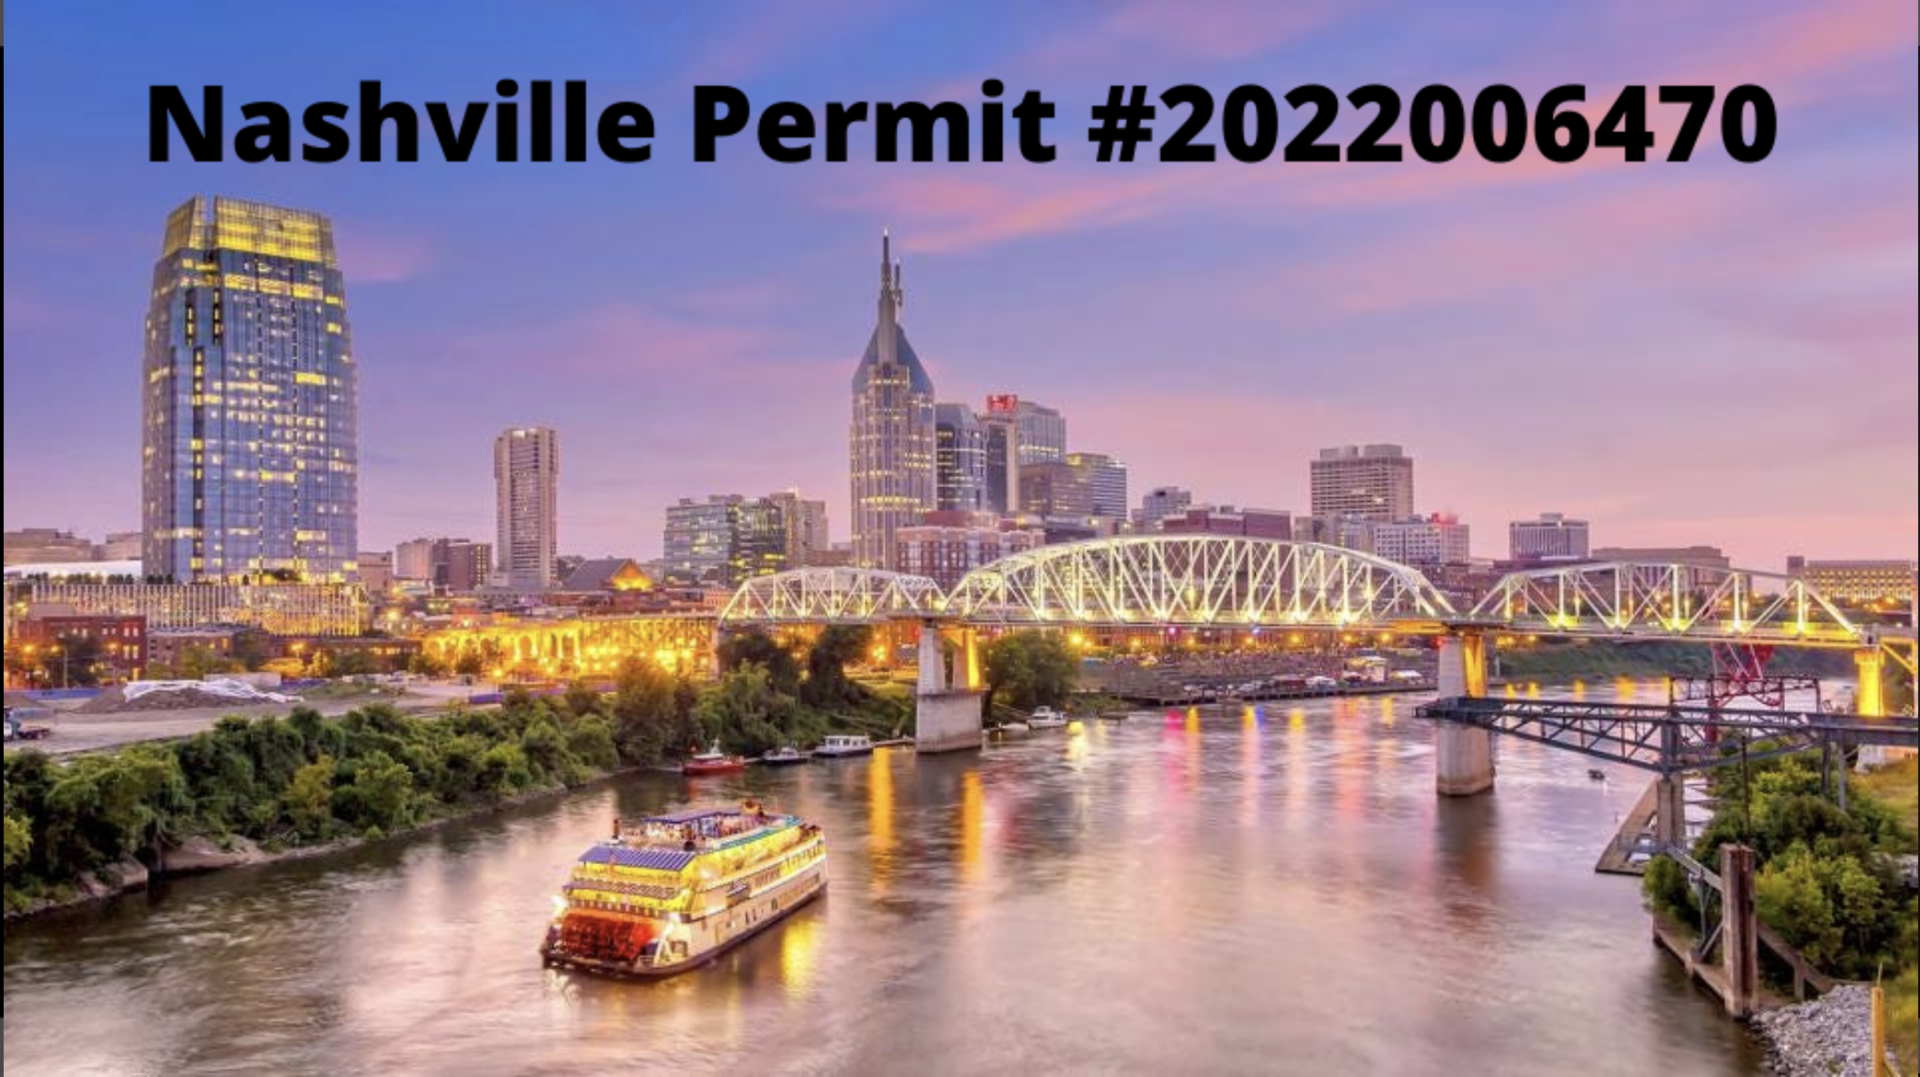 Nashville Permit for 3rd Unit: issued in 2022 followed by:2022006470